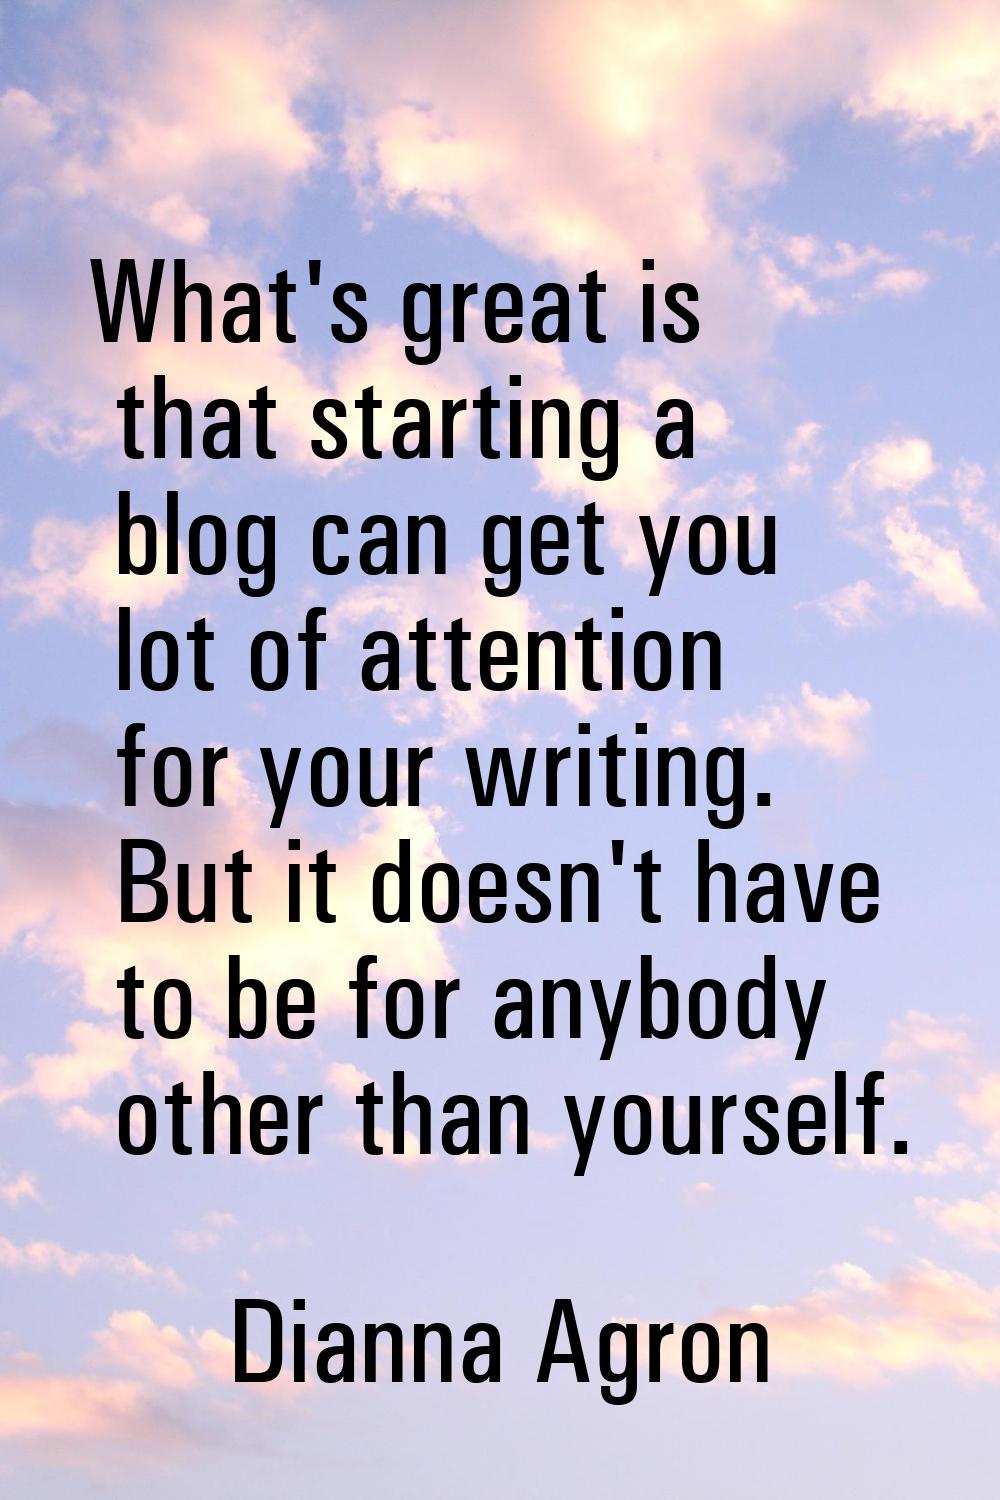 What's great is that starting a blog can get you lot of attention for your writing. But it doesn't 